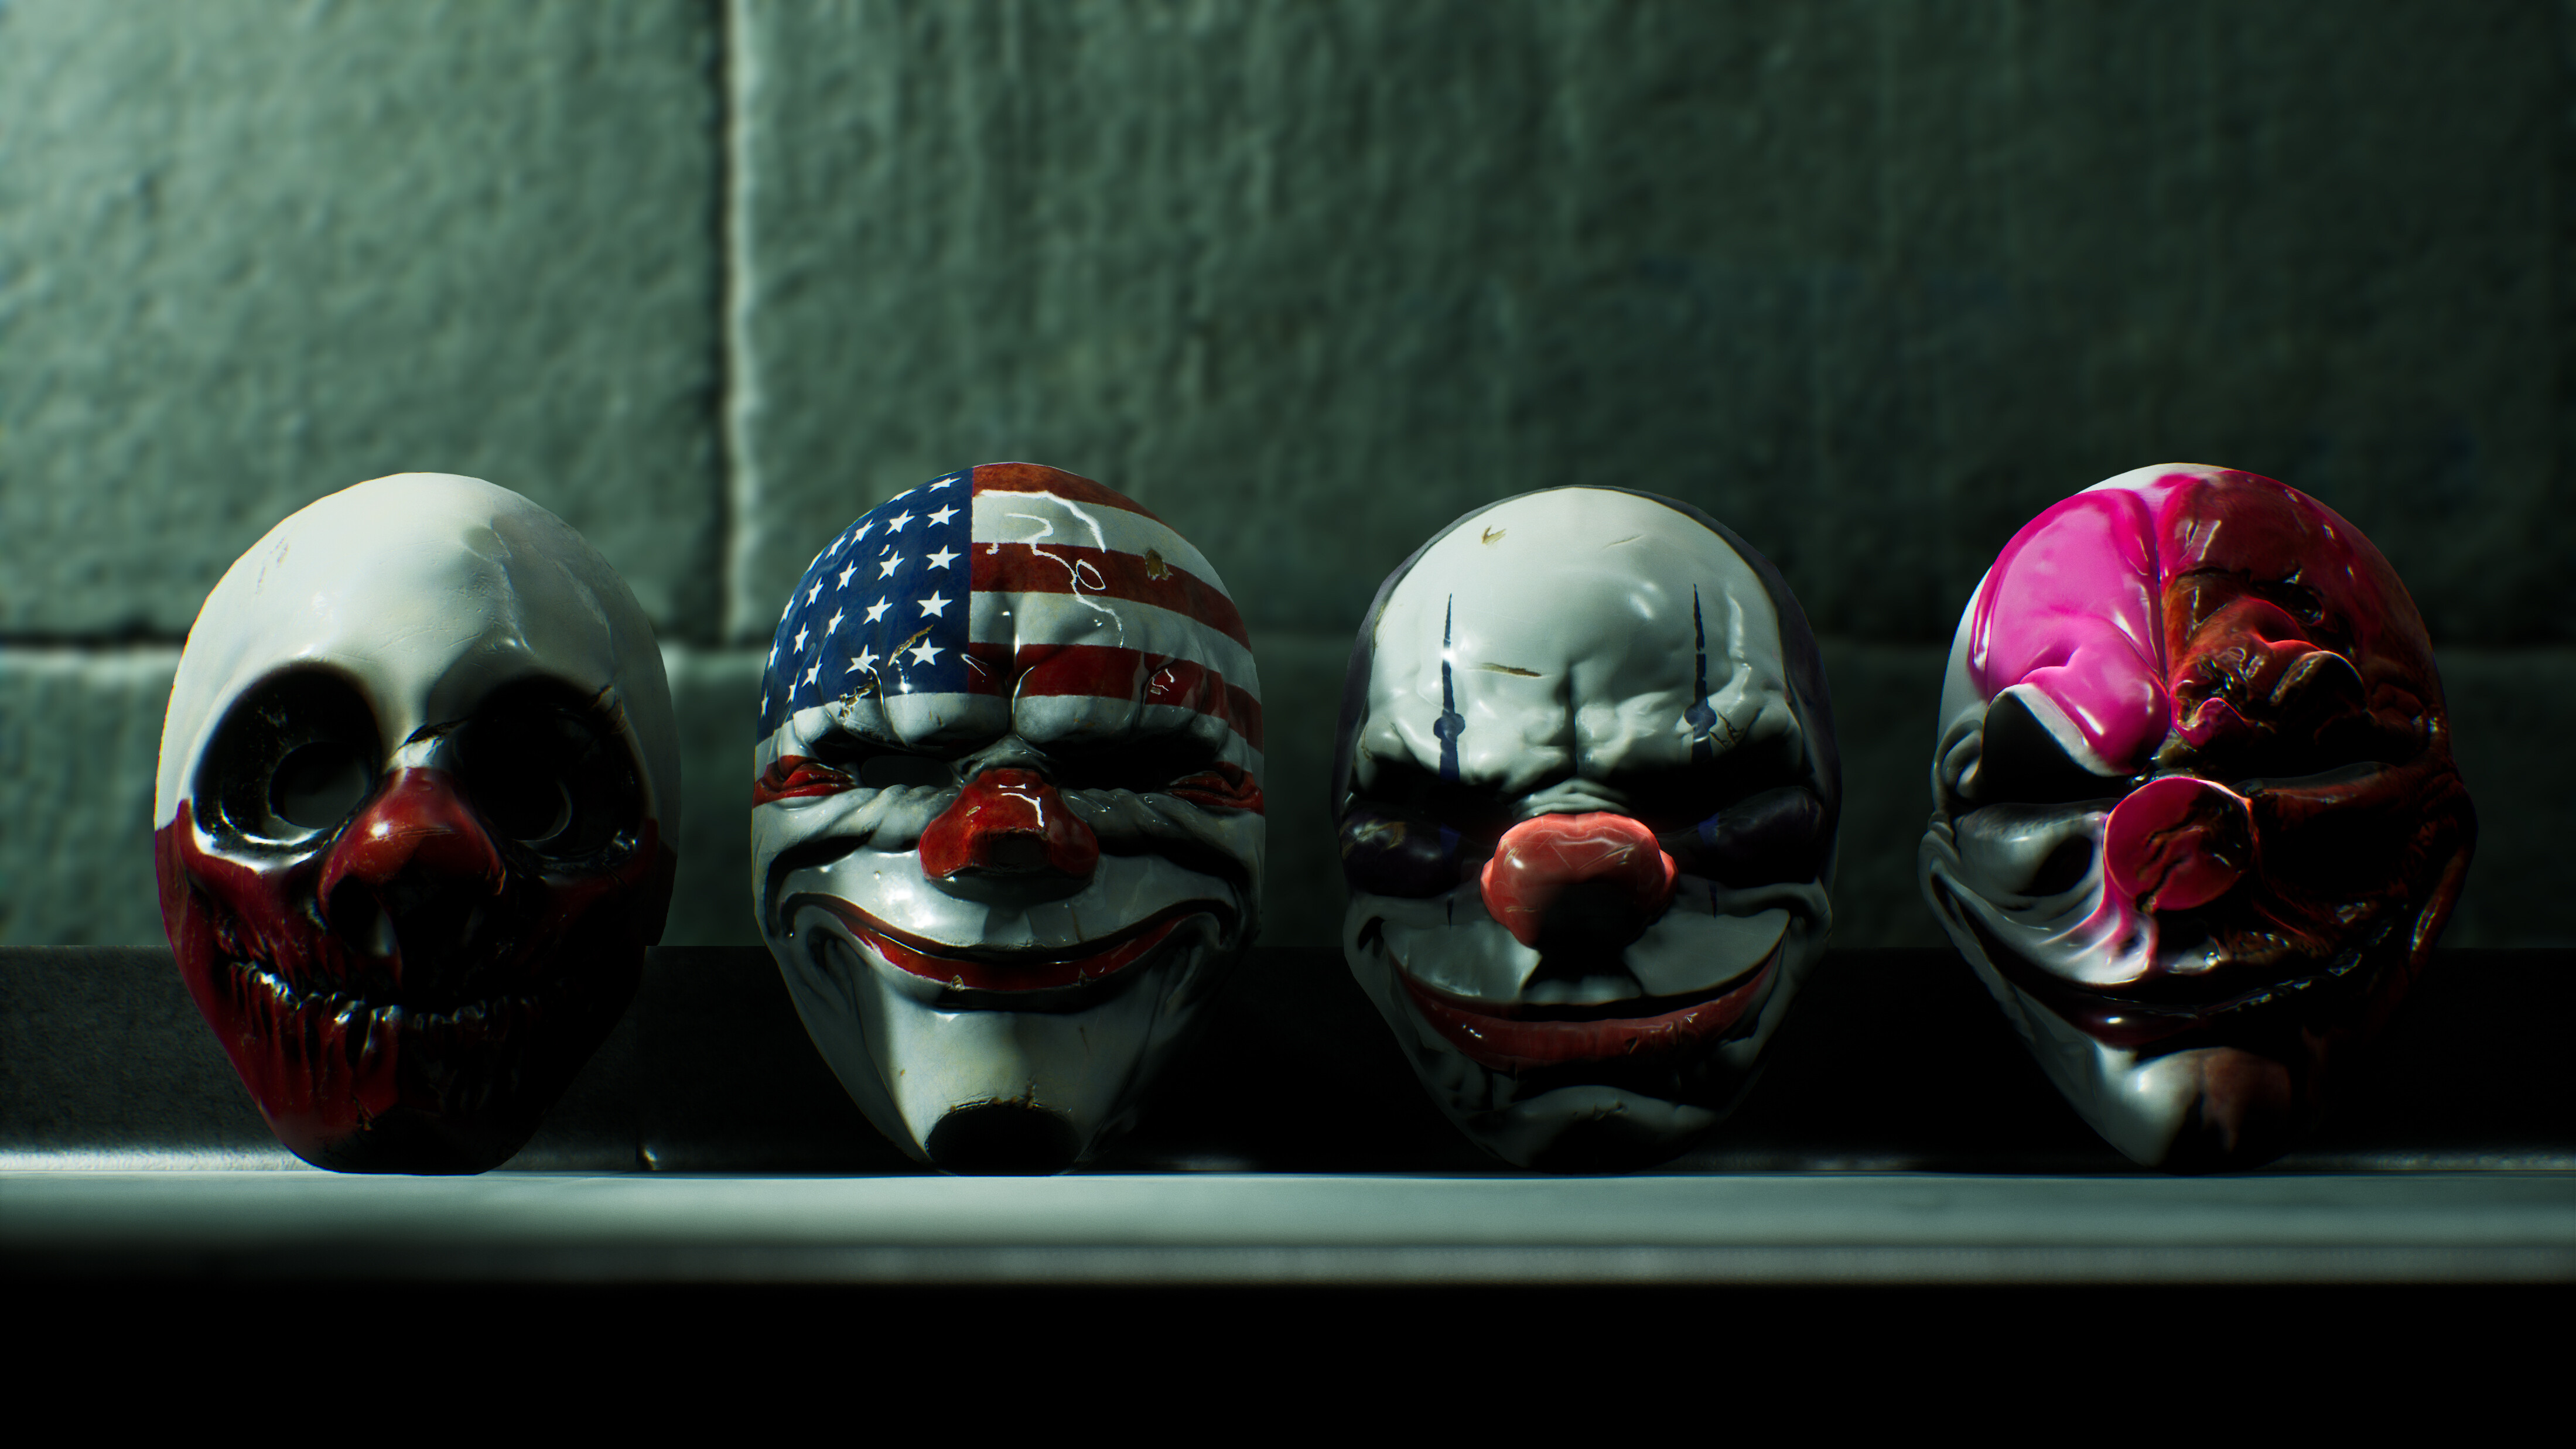 Additional Payday 3 Screenshots And Gameplay Revealed - Insider Gaming